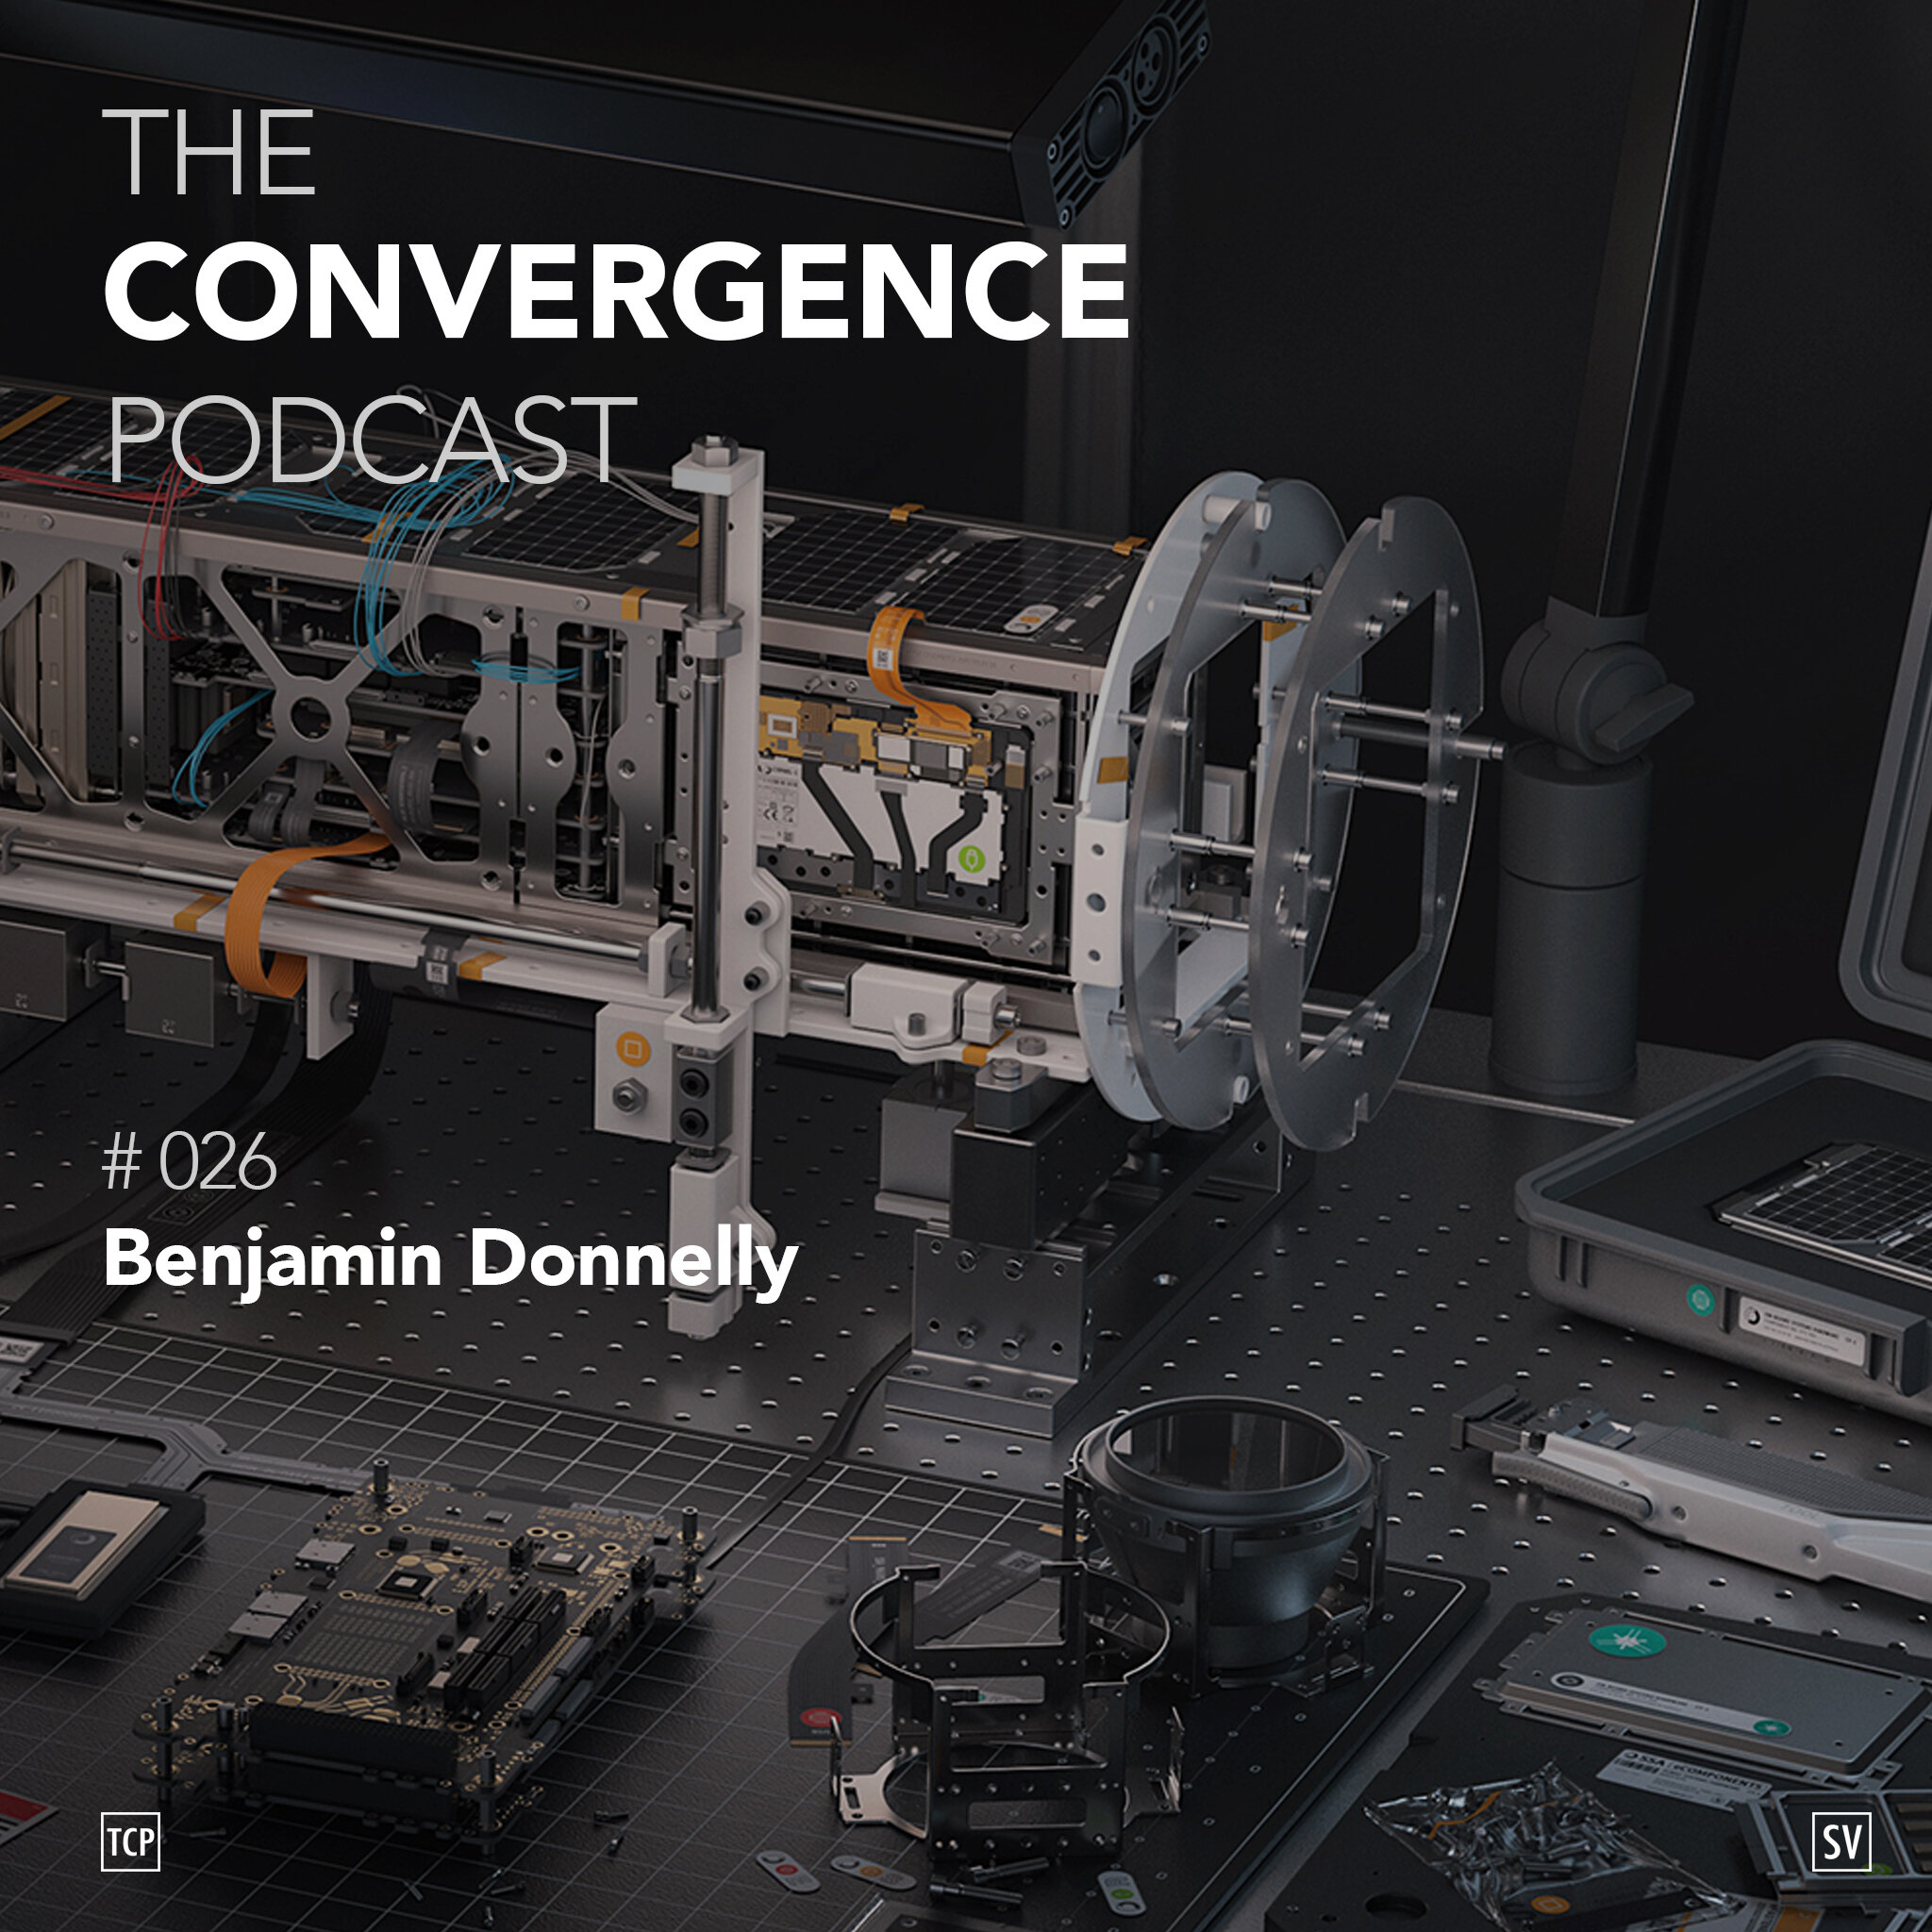 TheConvergencePodcast#026_Benjamin Donnelly.jpg